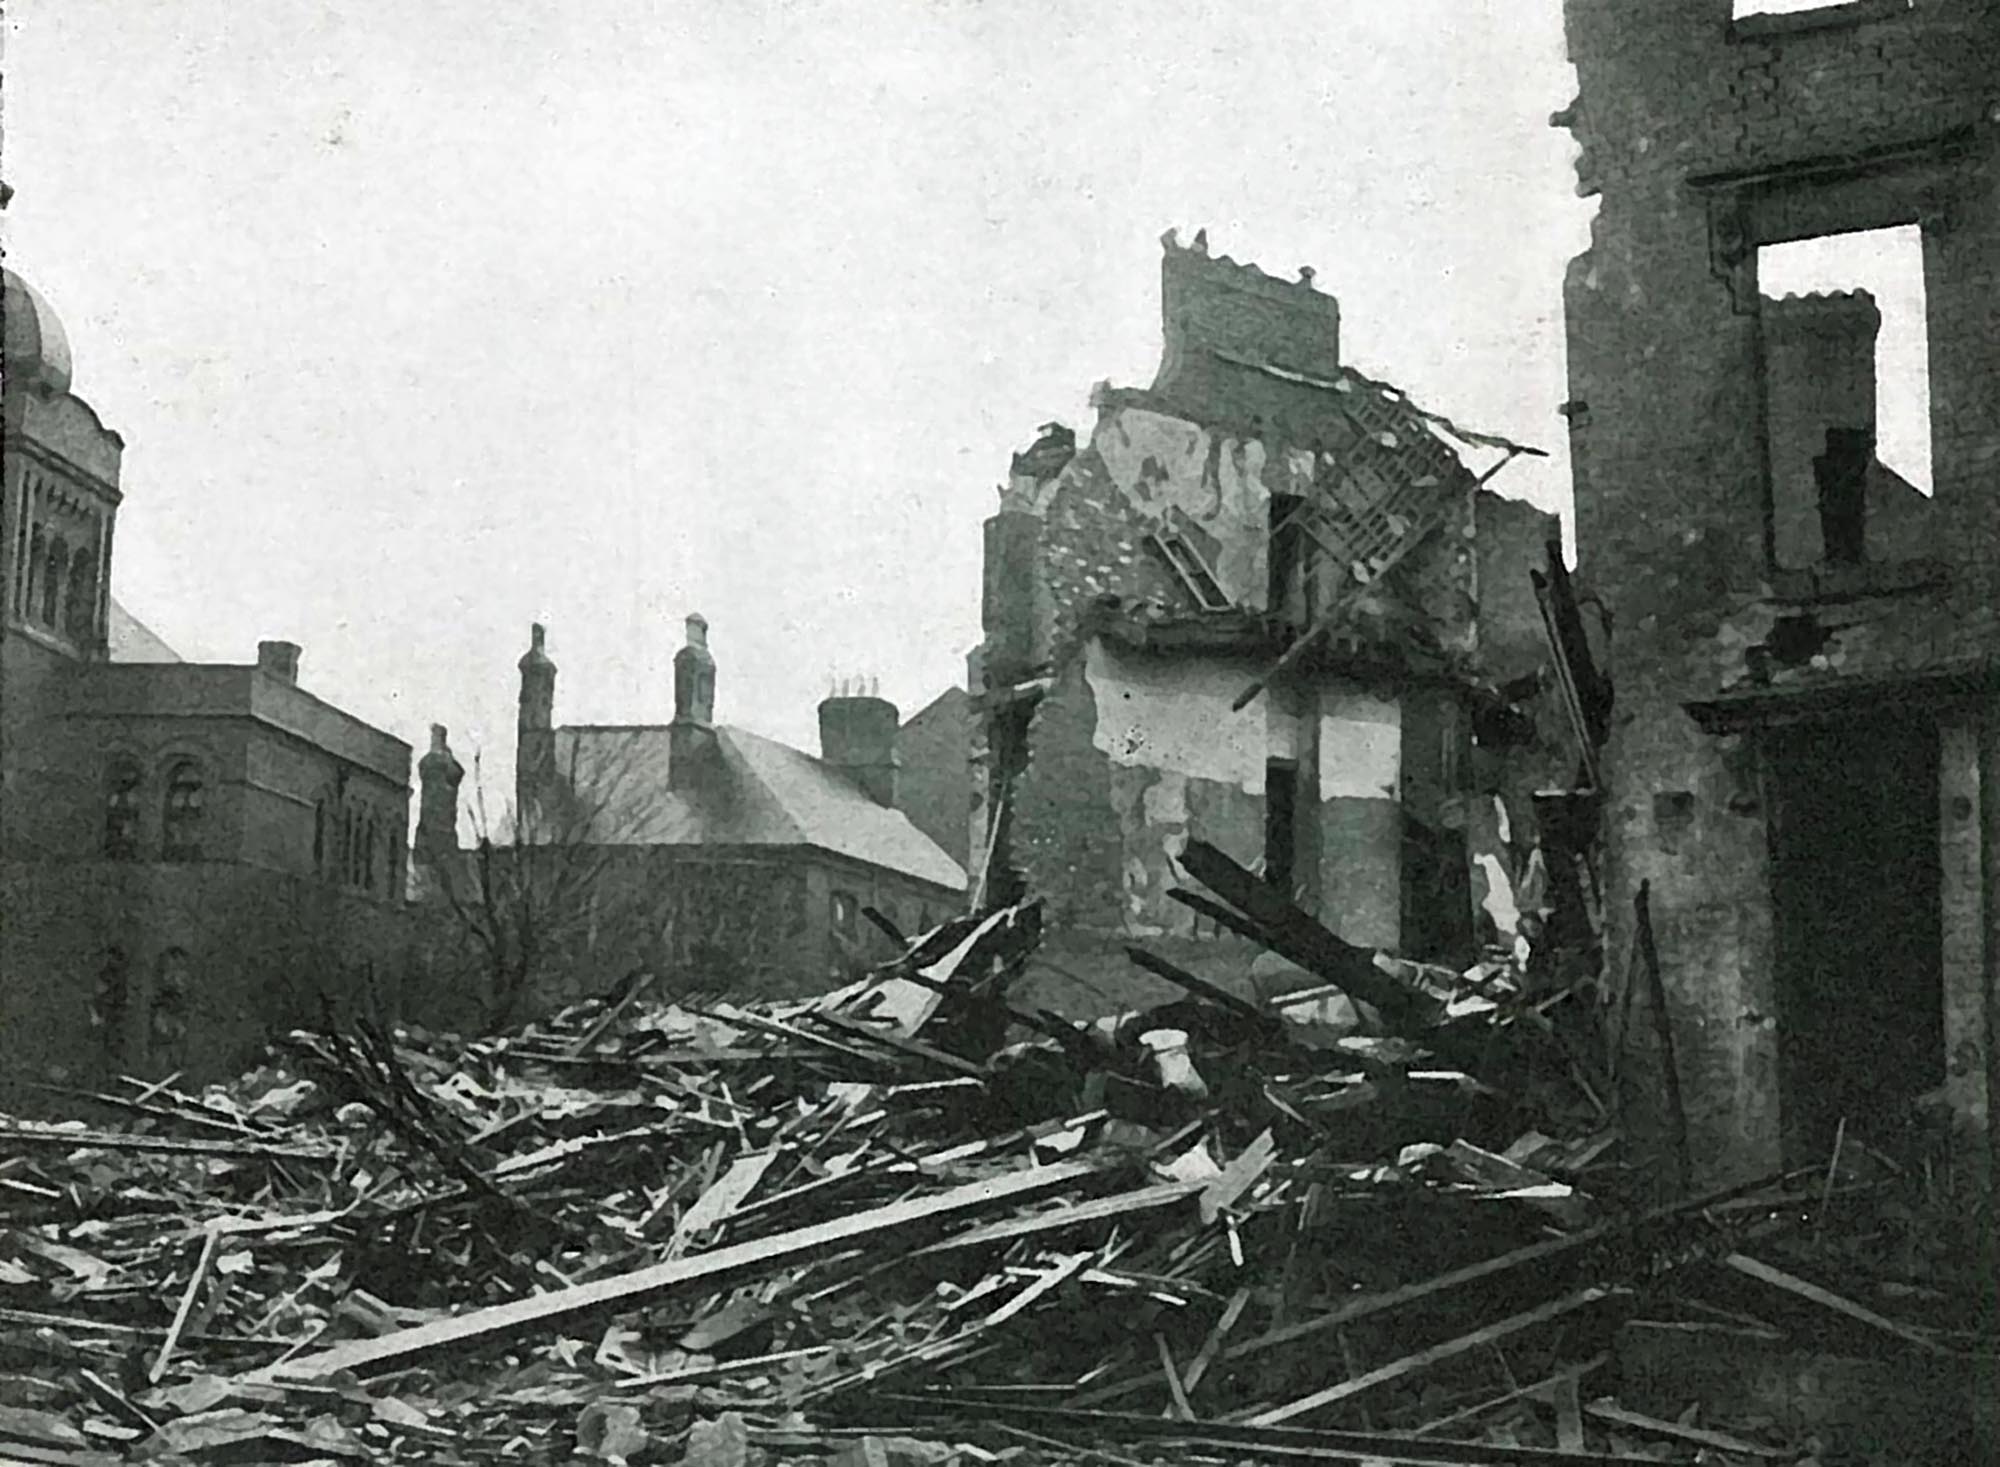 Highfield Street November 1940 after the bombing raid. The synagogue, on the far left, survived - Leicester Mercury Archive at the University of Leicester